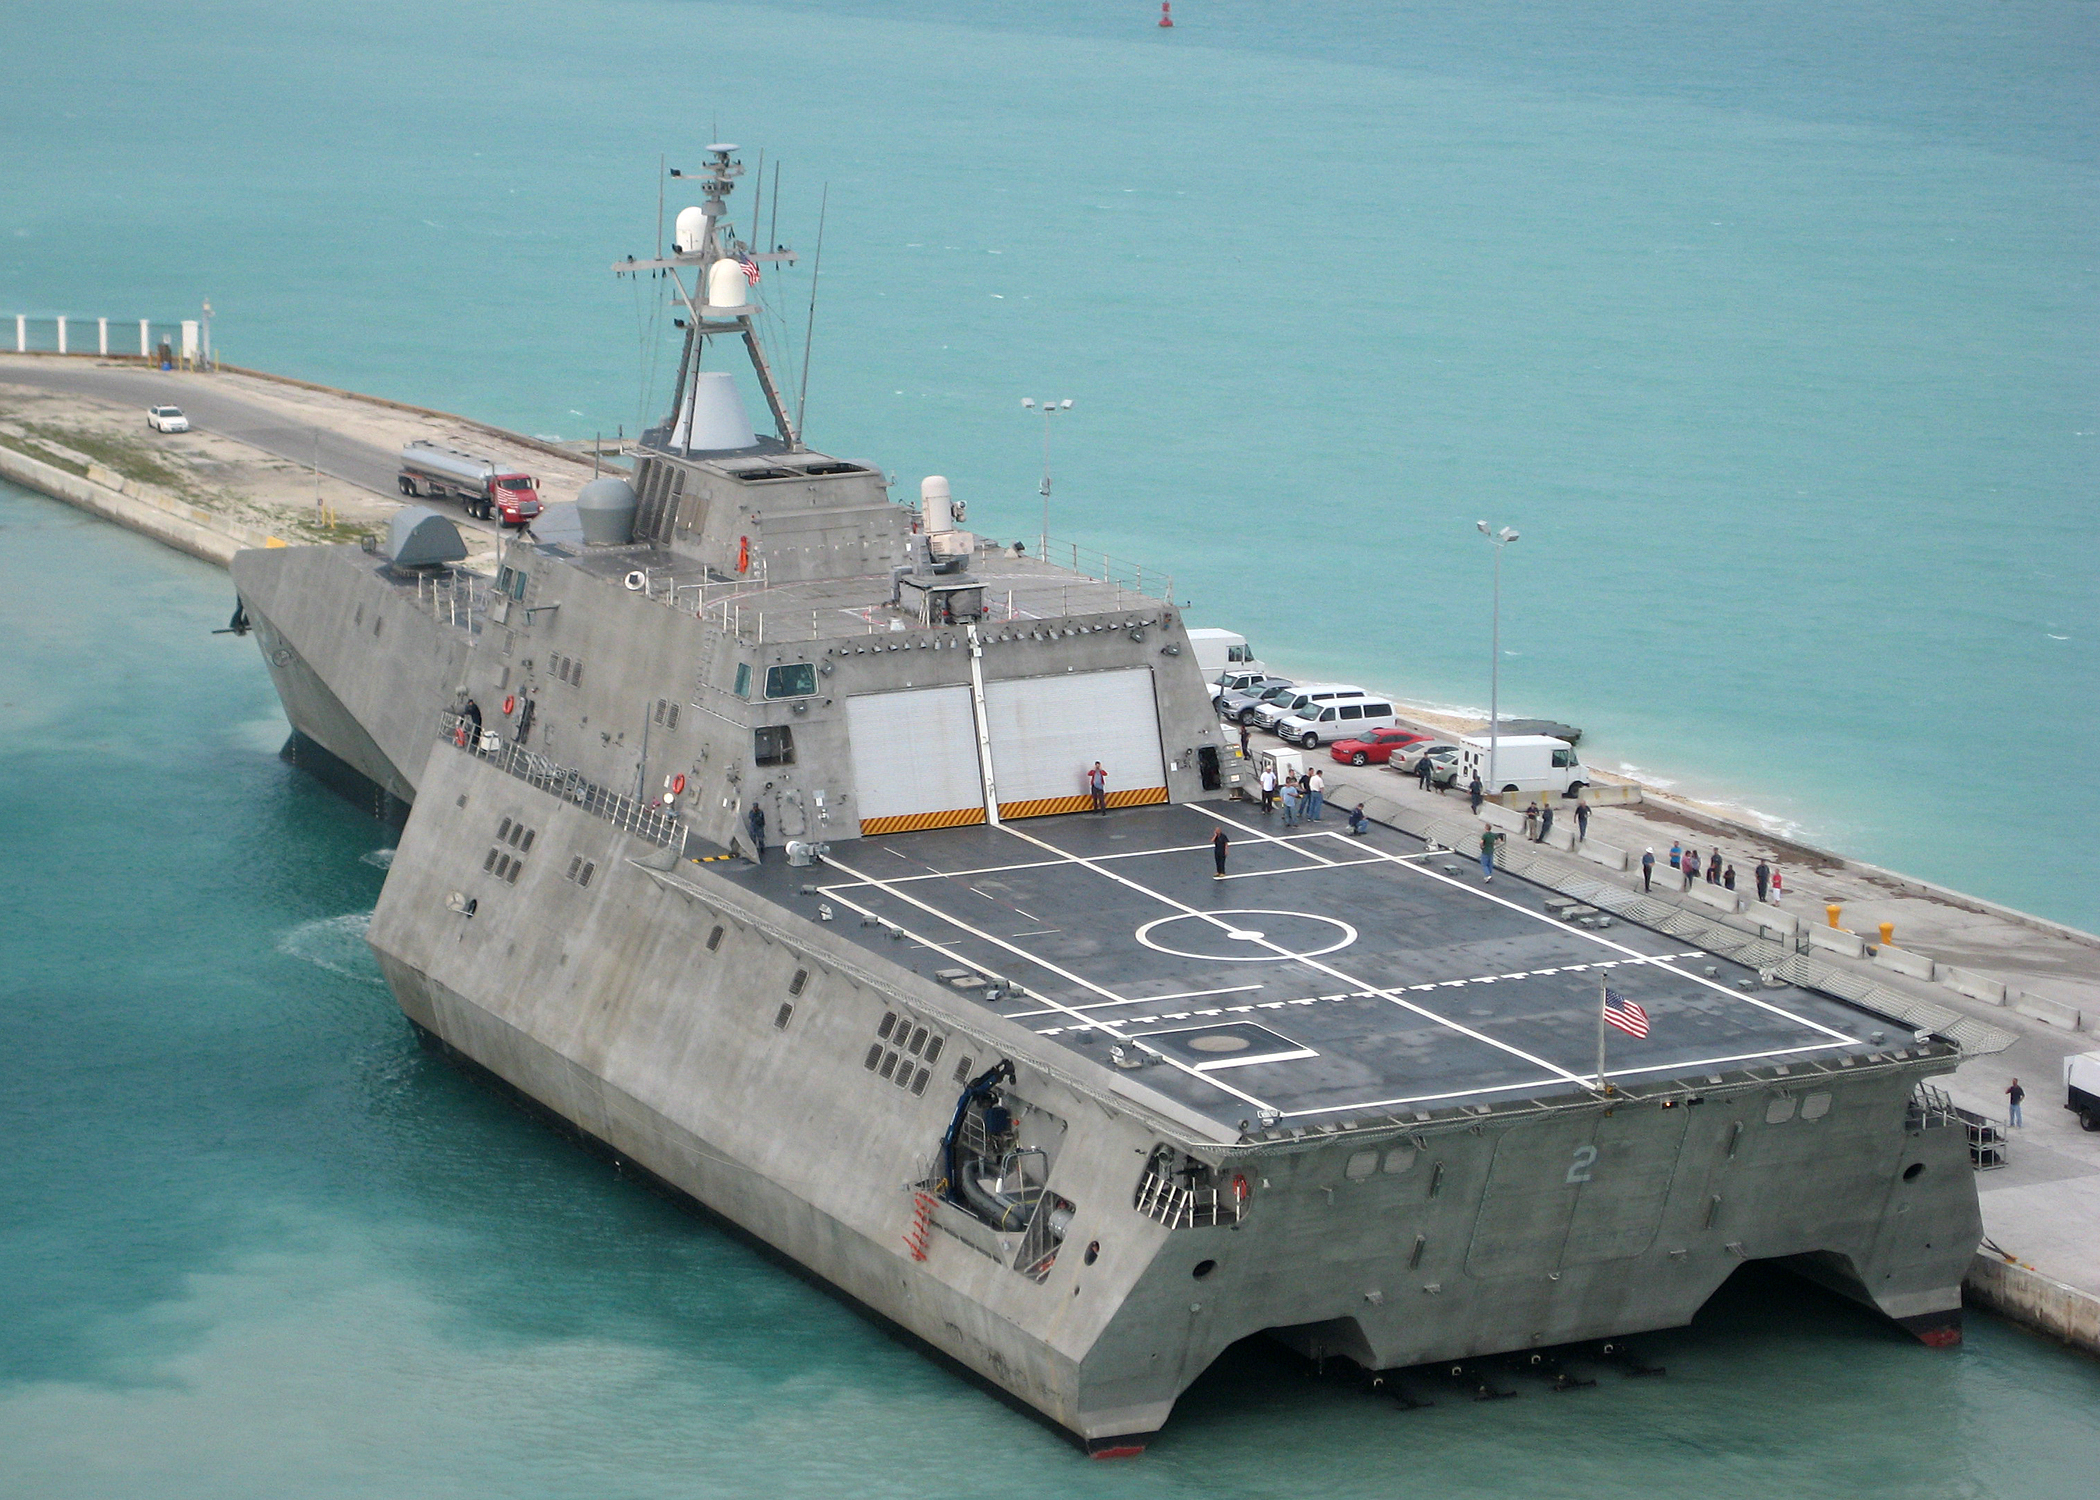 US_Navy_100329-N-1481K-293_USS_Independence_%28LCS_2%29_arrives_at_Mole_Pier_at_Naval_Air_Station_Key_West.jpg